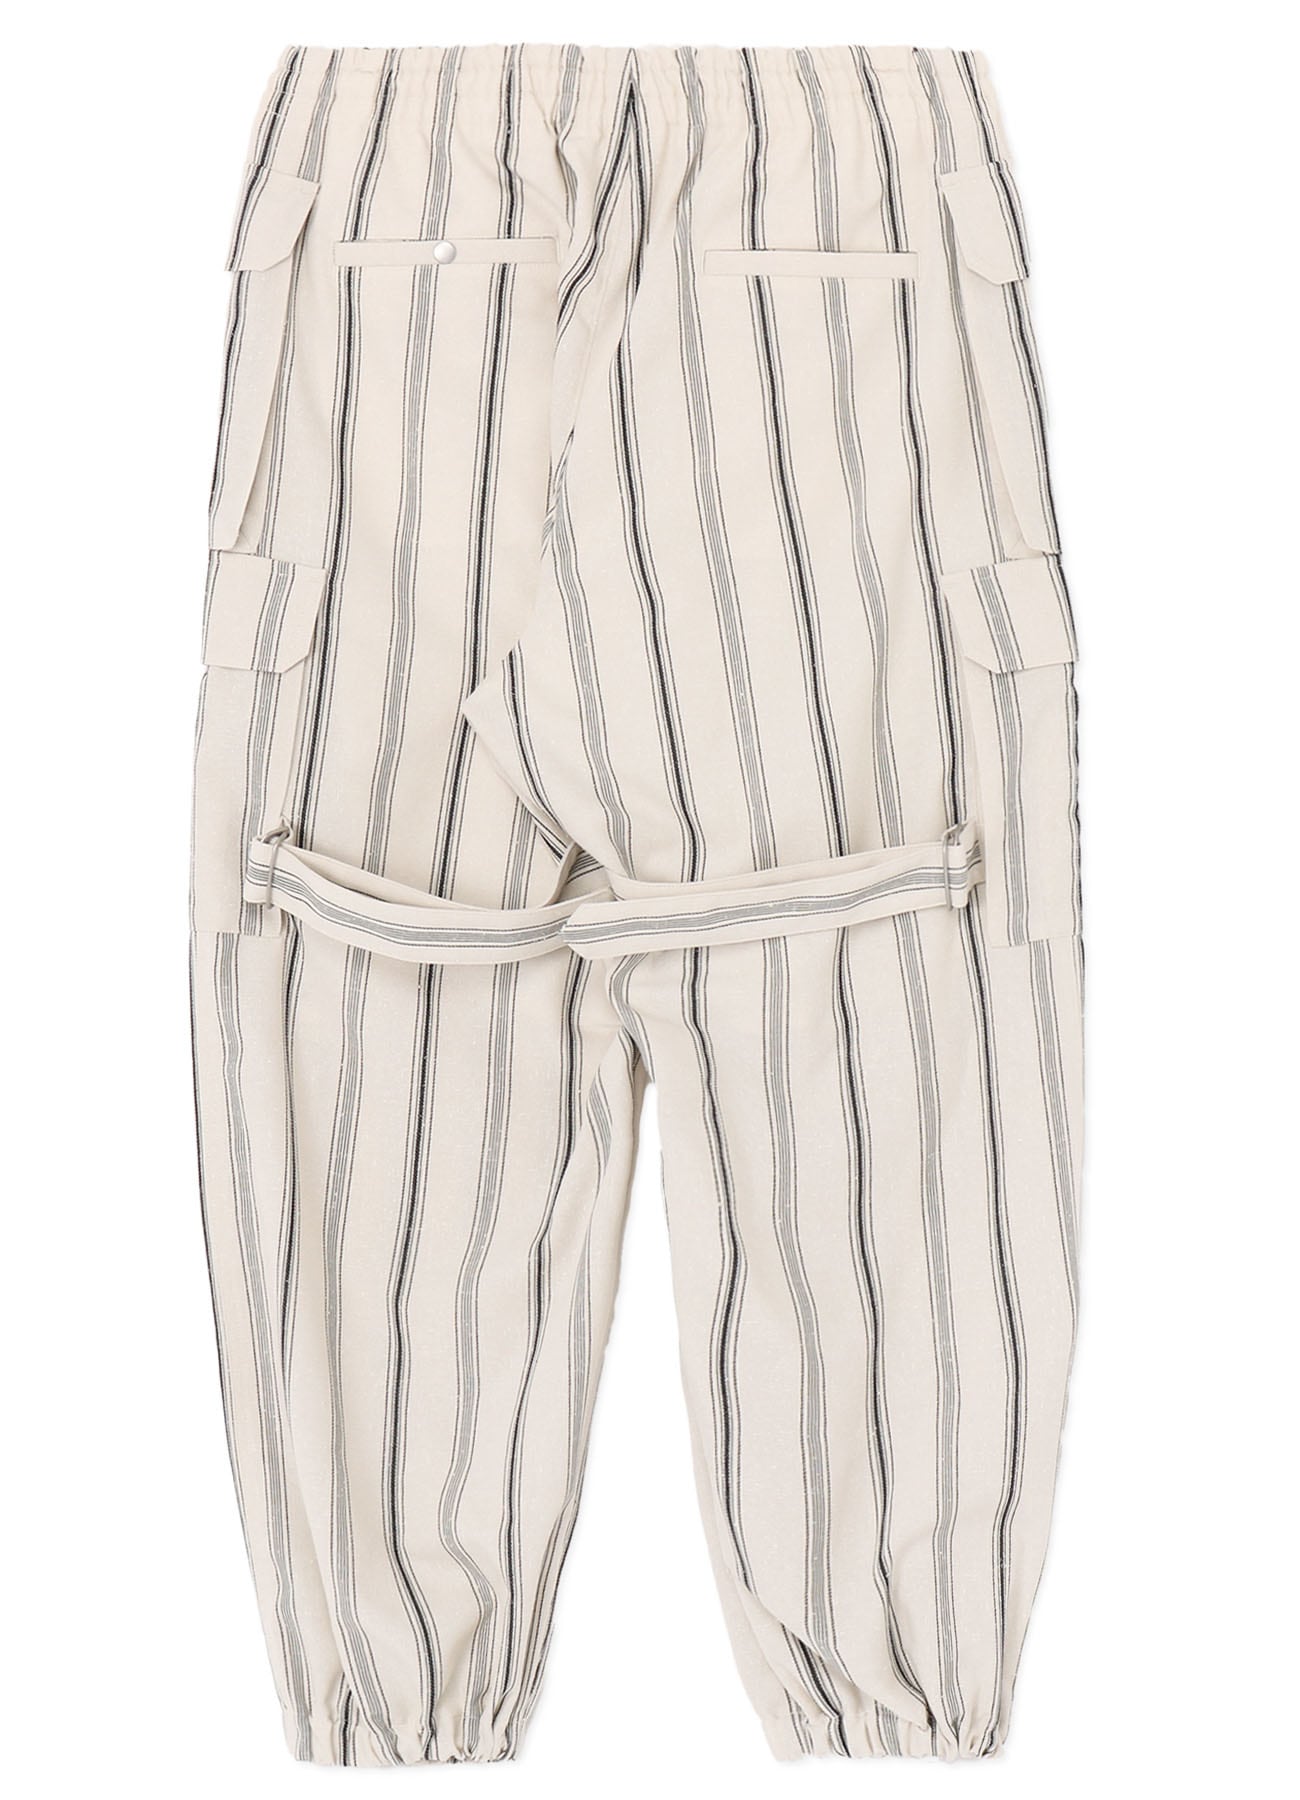 HARD TWISTED STRIPE POCKET PANTS(S Off White): Y's.｜THE SHOP 